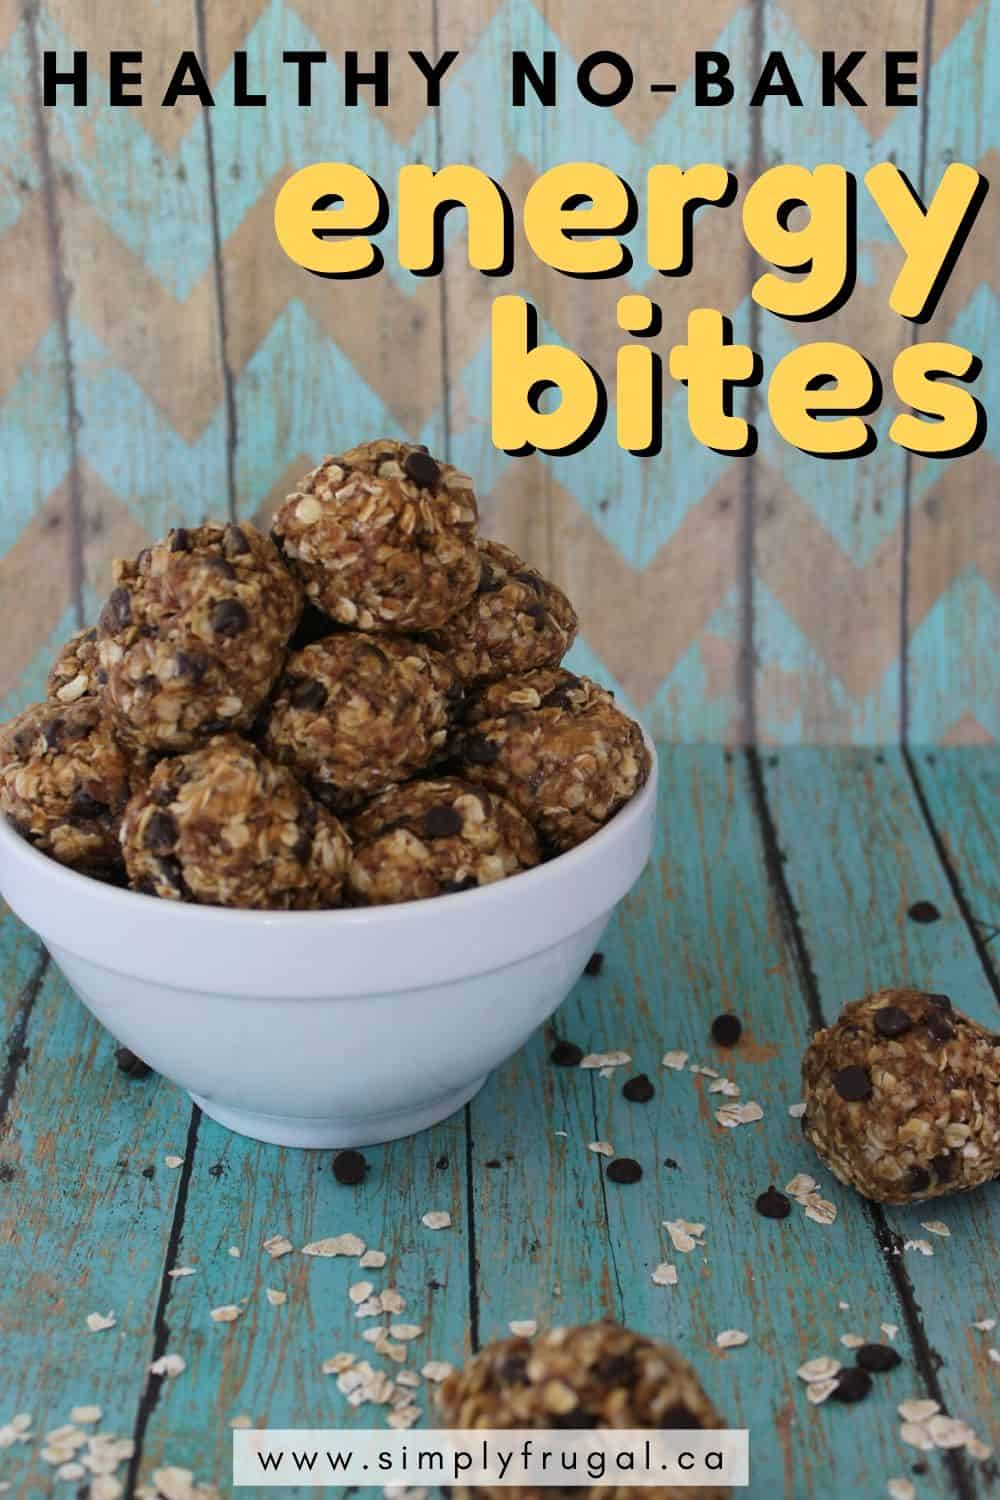 These Healthy No Bake Energy Bites come together really easily and are sure to satisfy your snack craving!